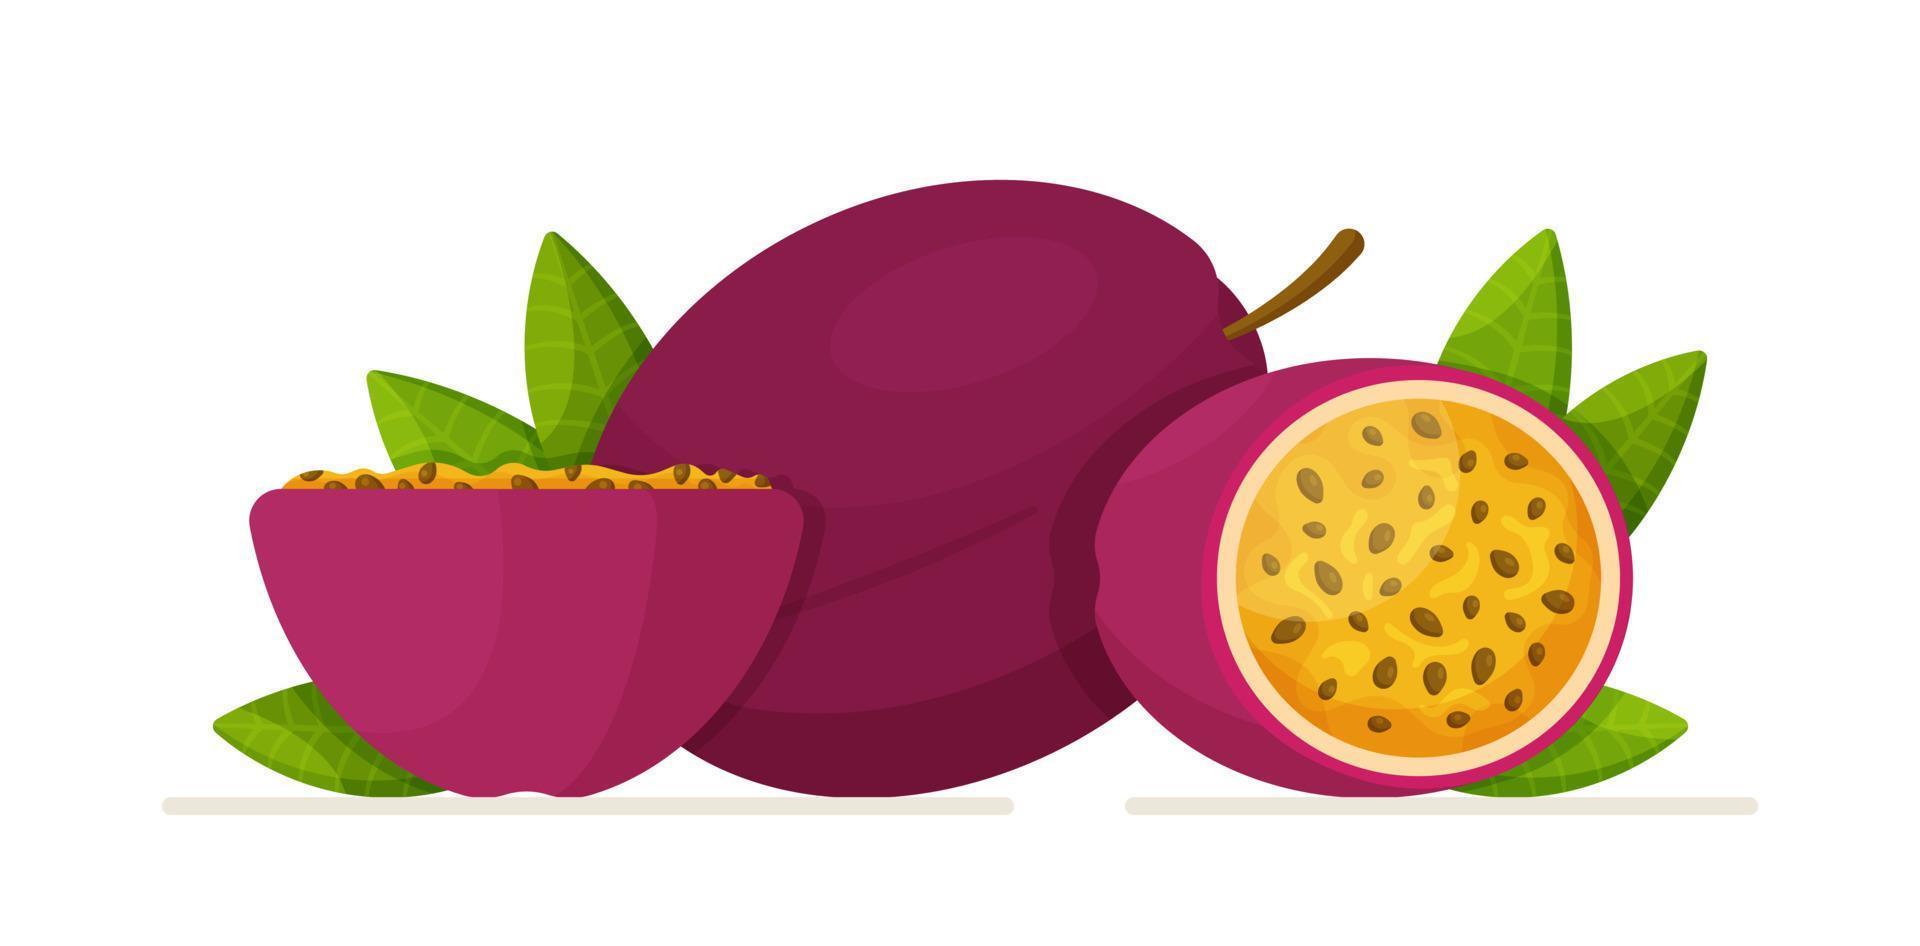 The passion fruit is isolated on a white background. Vector illustration of passion fruit. Drawing of a whole and half of a juicy purple passion fruit